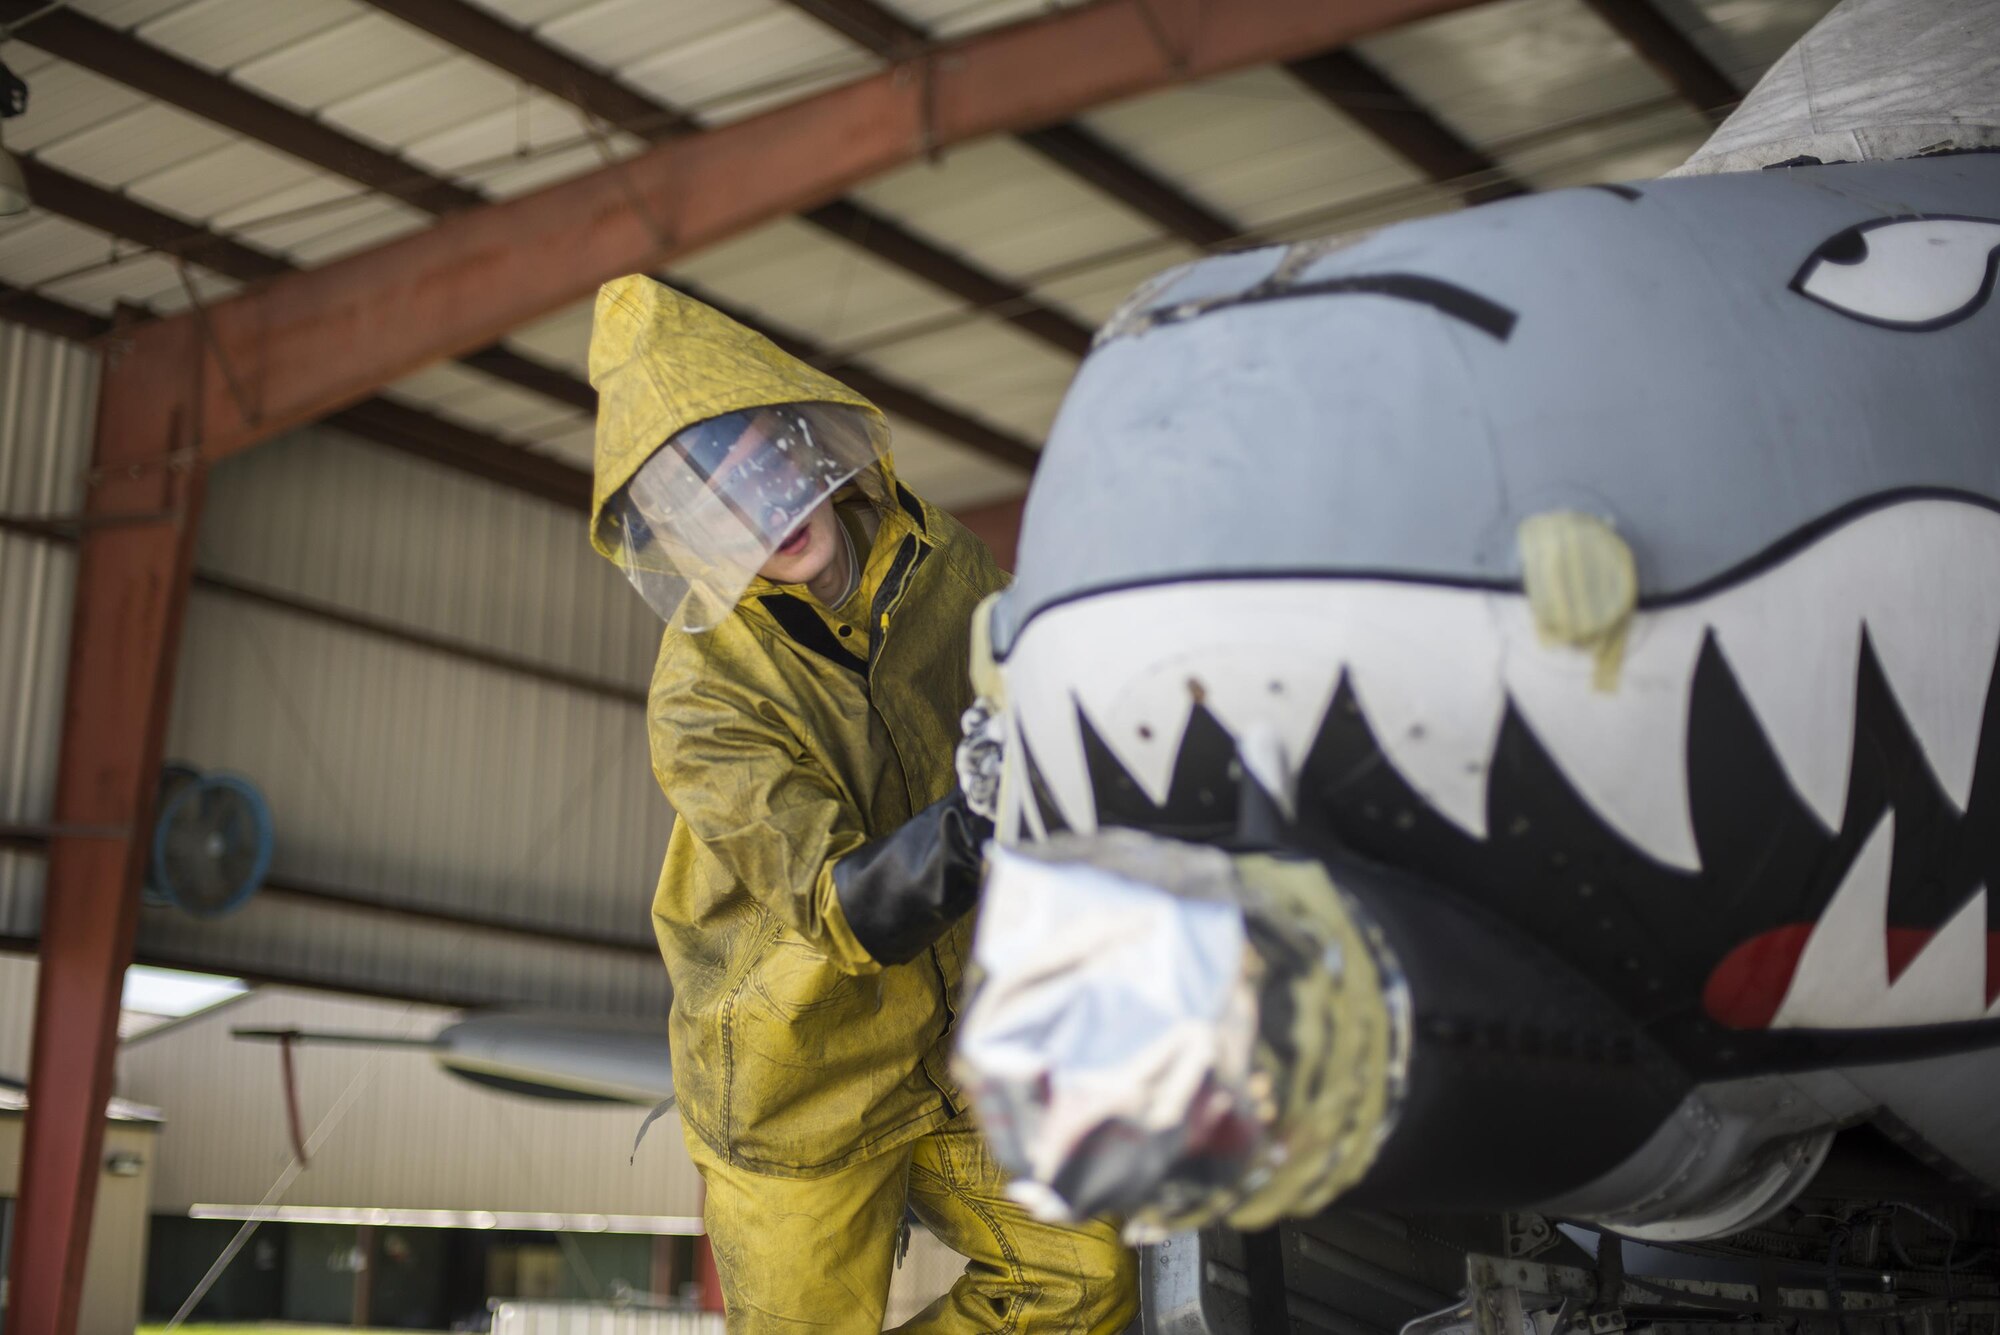 U.S. Air Force Senior Airman Brandon Vandyke, 23d Aircraft Maintenance Squadron crew chief, scrubs the side of an A-10C Thunderbolt II, June 16, 2016, at Moody Air Force Base, Ga. Airmen begin the wash process by covering every hole of the aircraft to avoid water damage to valuable equipment. (U.S. Air Force photo by Airman Daniel Snider/Released)